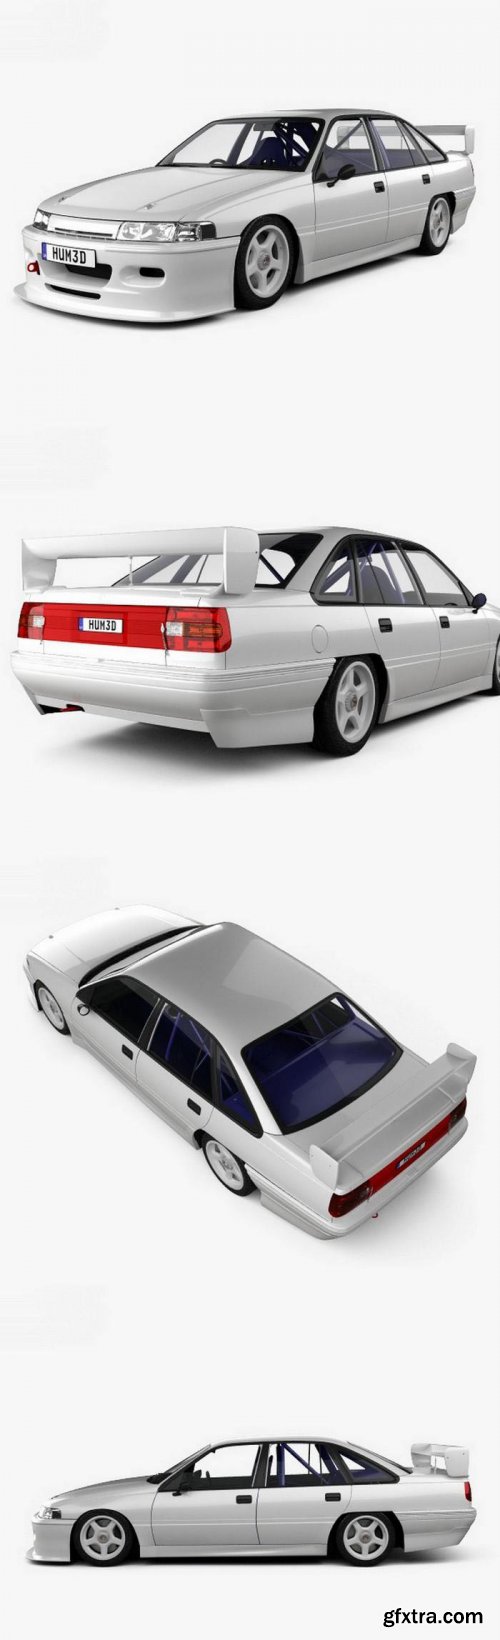 Holden Commodore Touring Car with HQ interior 1993 3D Model